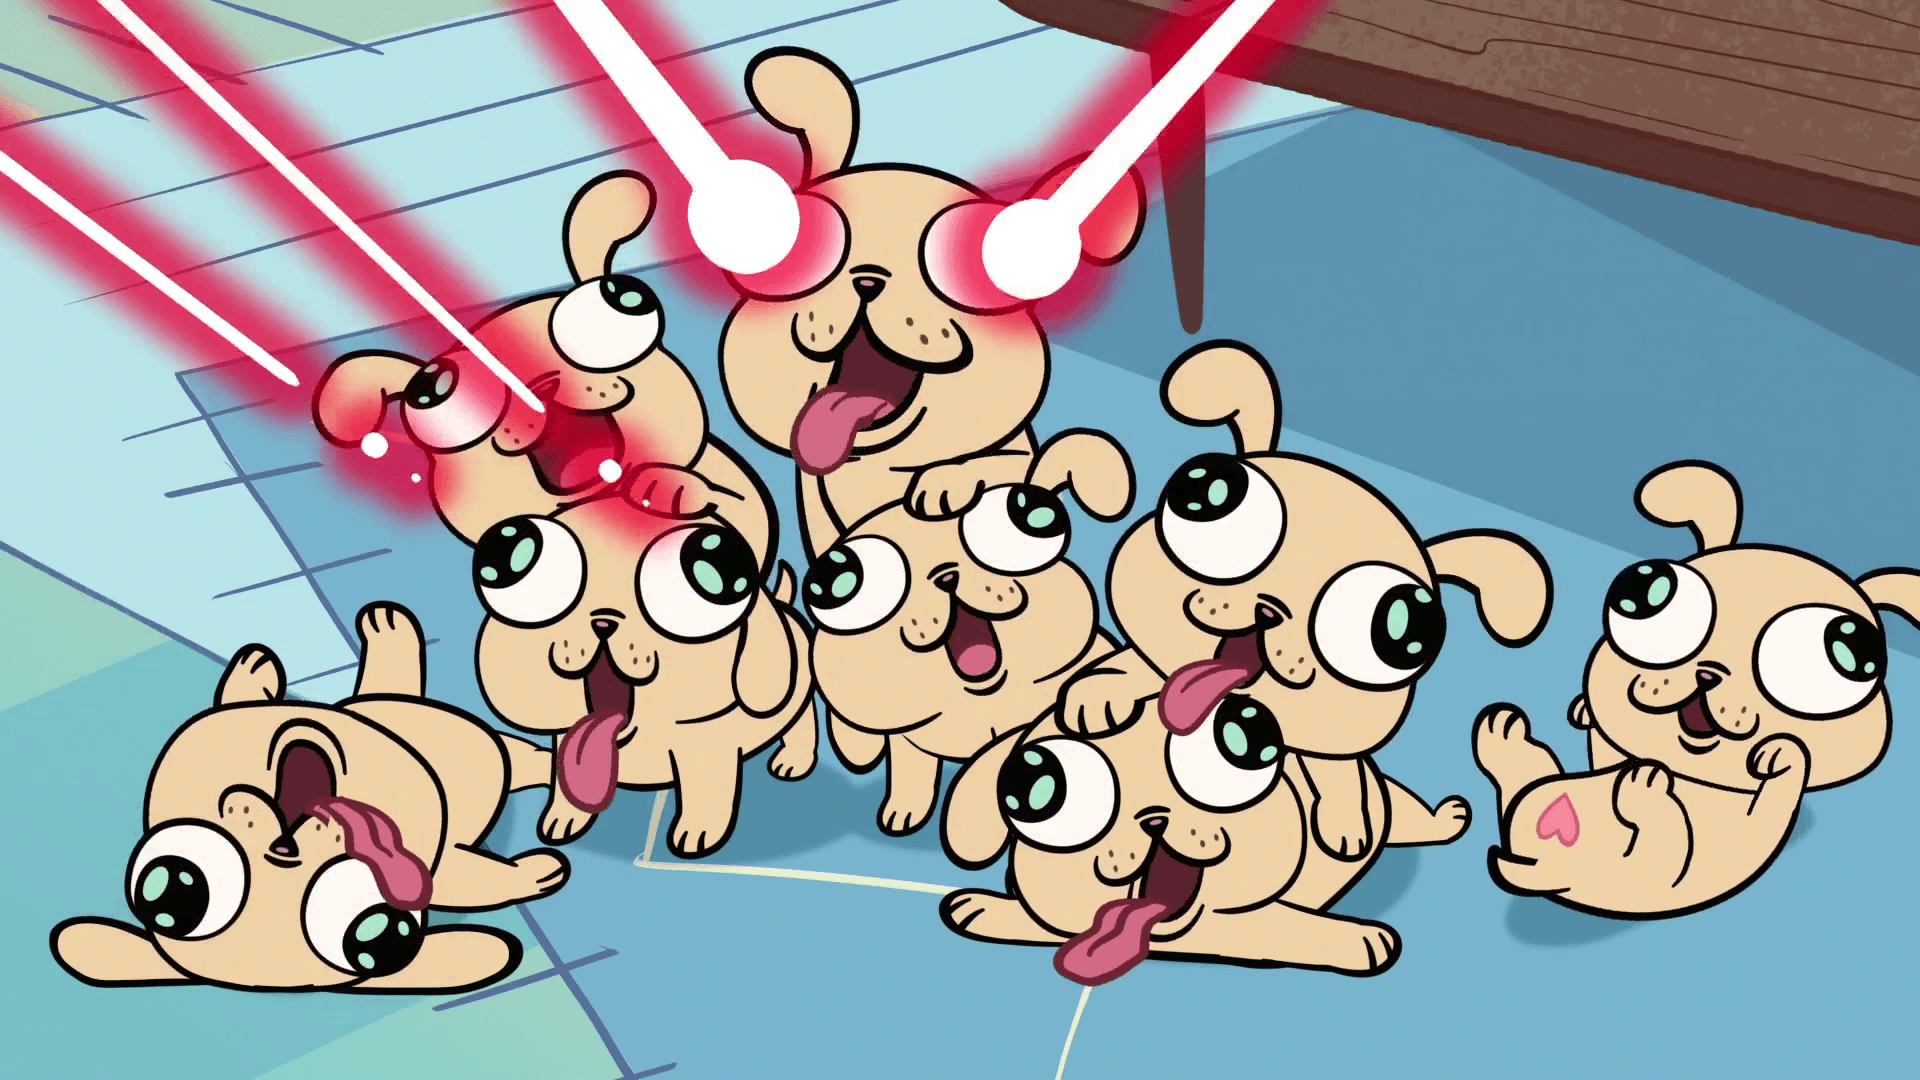 Laser puppies. Star vs. the Forces of Evil Wiki powered